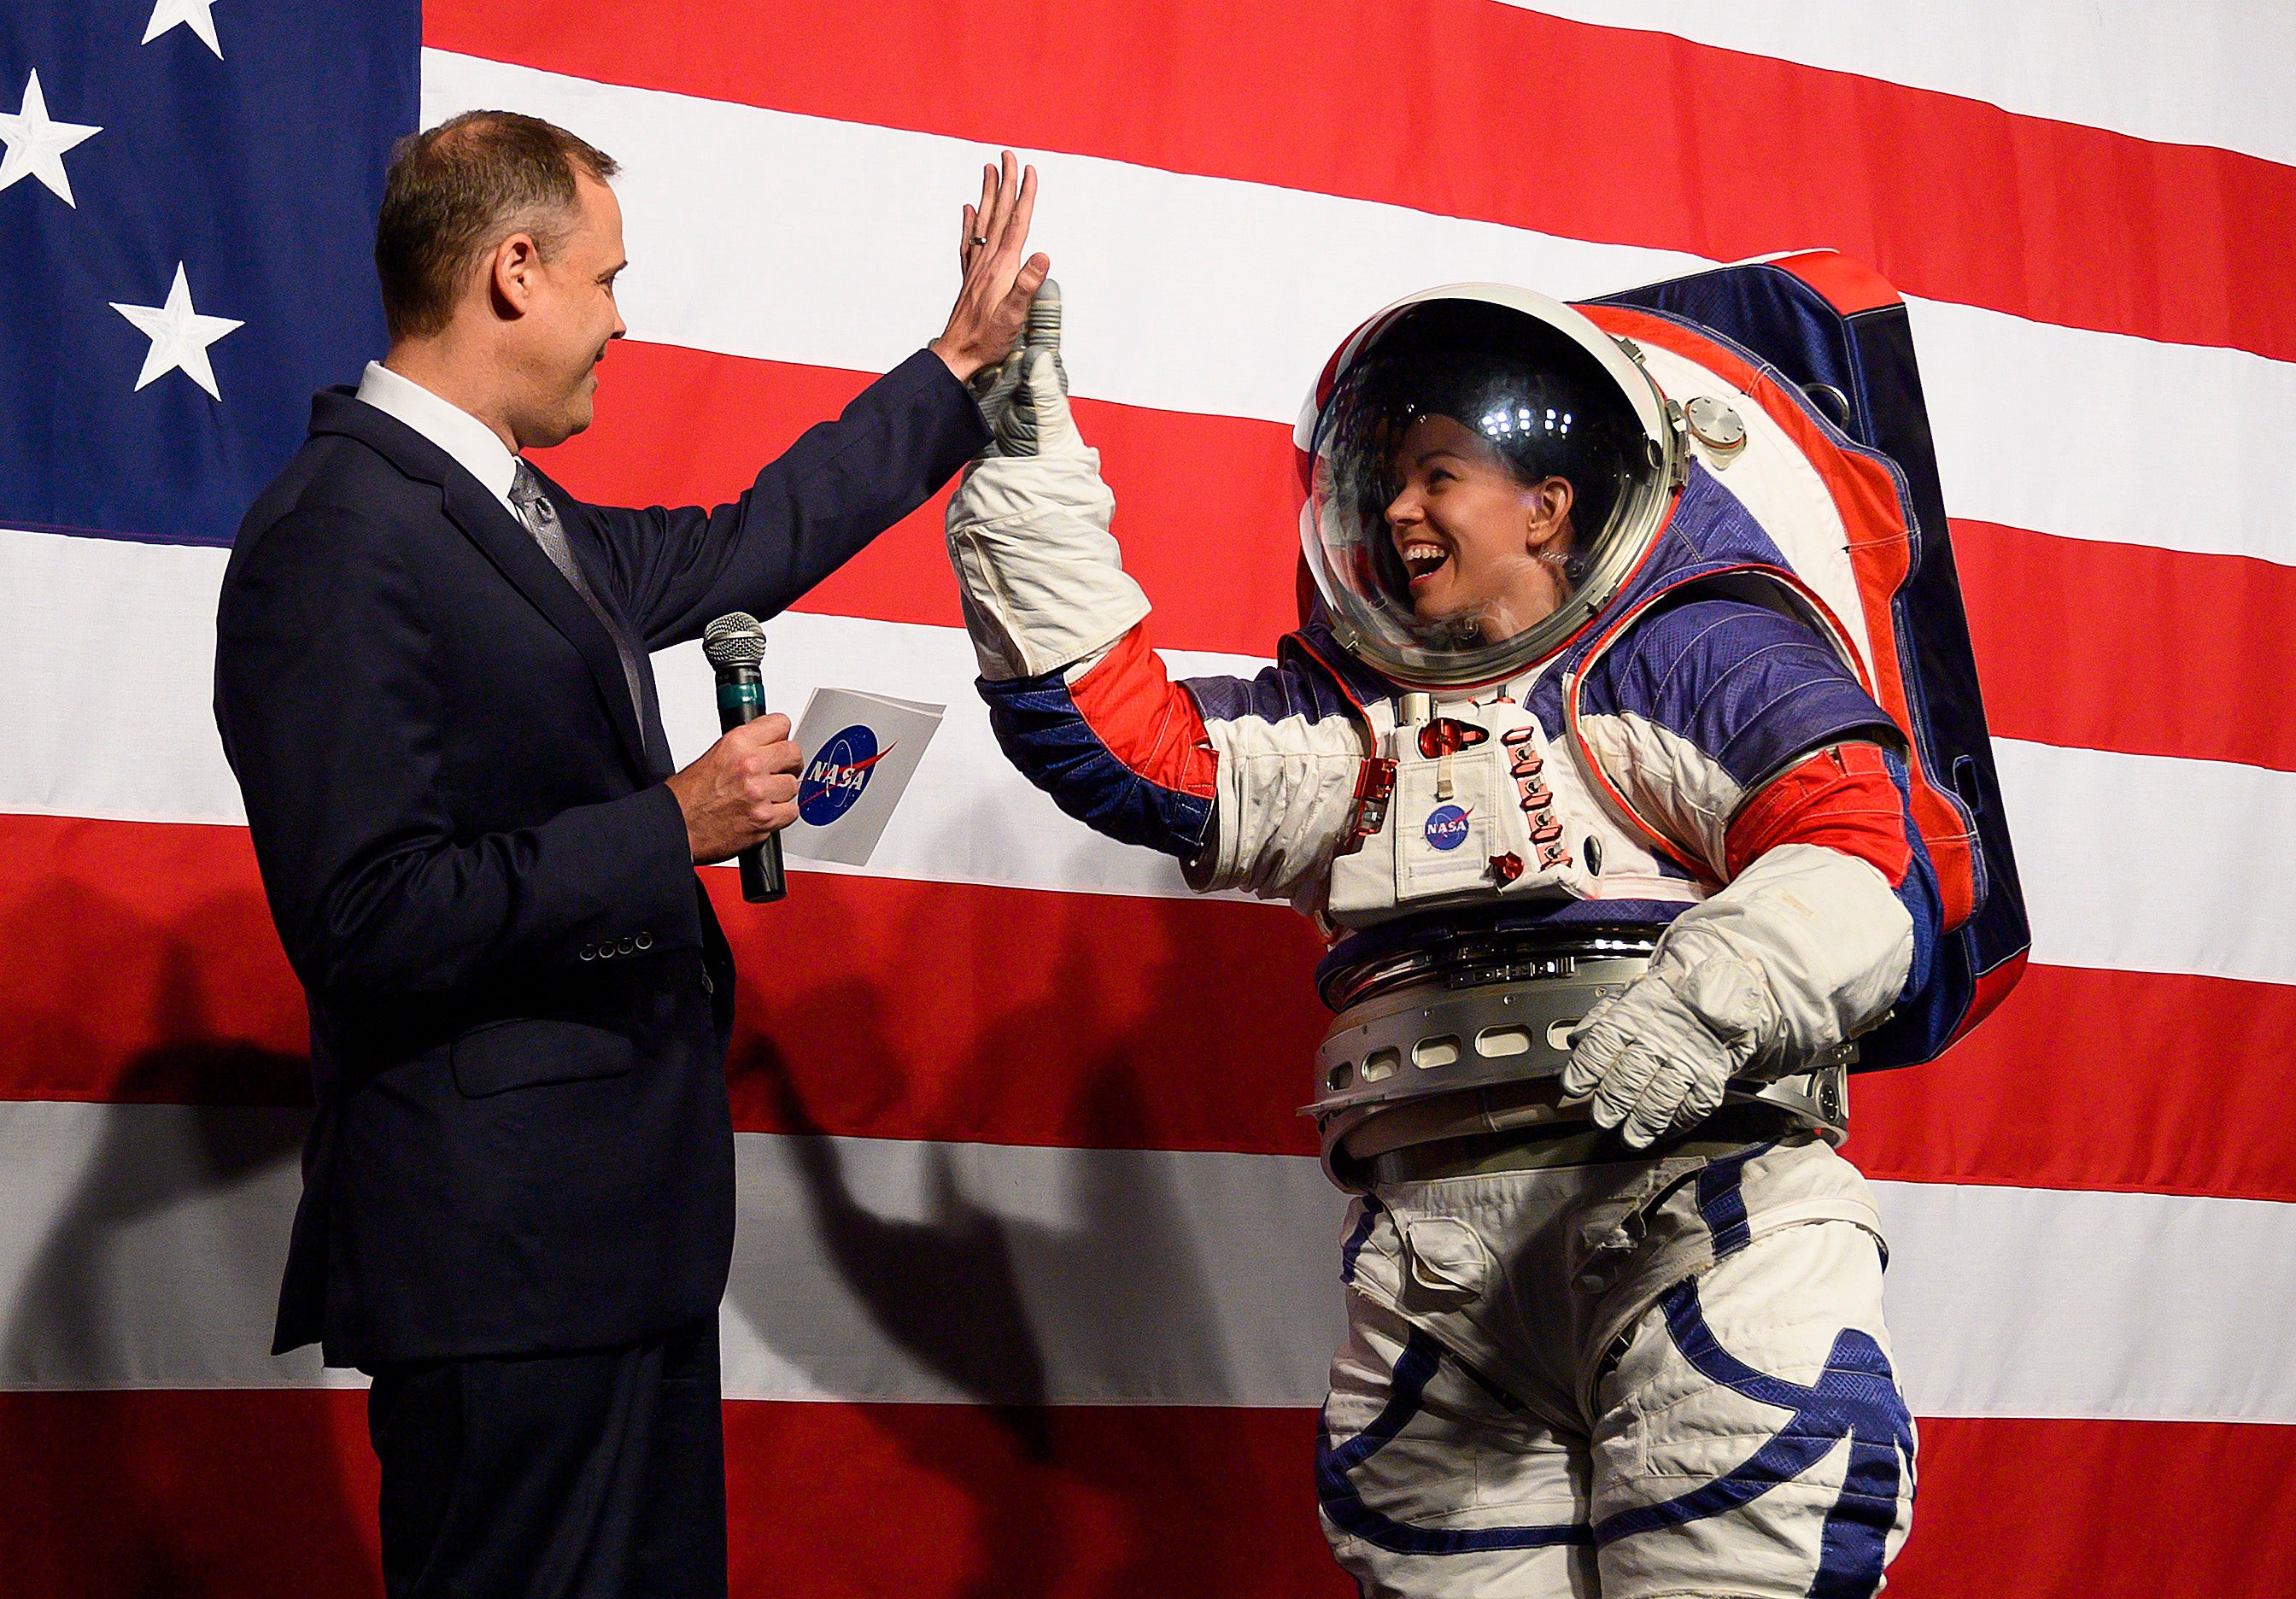 NASA administrator Jim Bridenstine (L) welcomes Advance space suit engineer, Kristine Davis (R), to the stage during a press conference displaying the next generation of space suits as parts of the Artemis program in Washington, DC on October 15, 2019